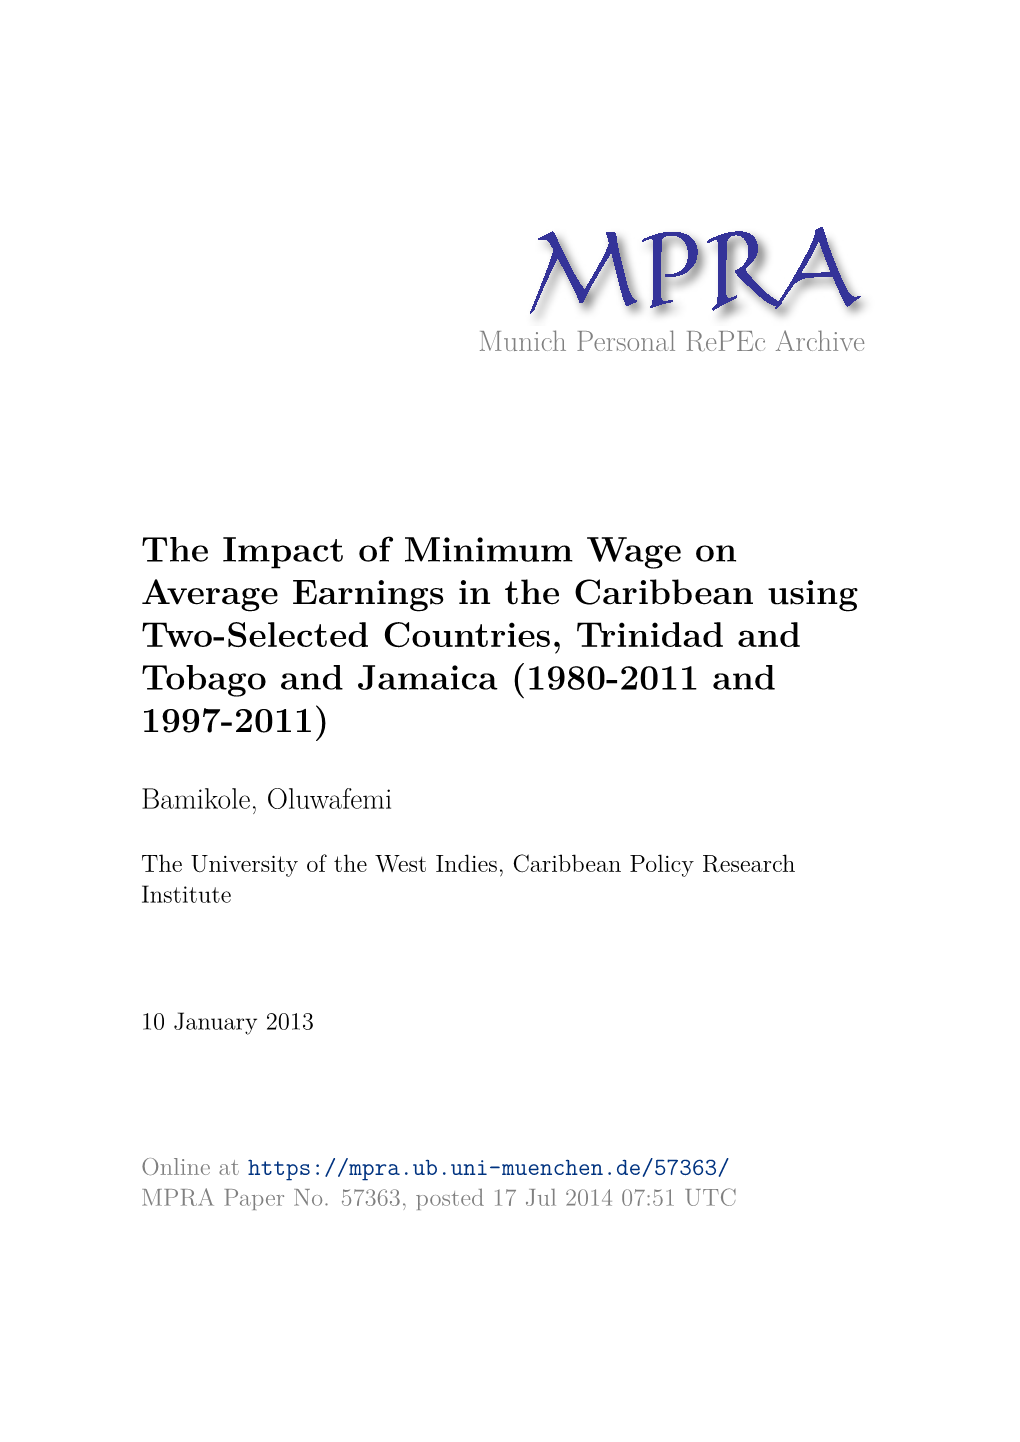 The Impact of Minimum Wage on Average Earnings in the Caribbean Using Two-Selected Countries, Trinidad and Tobago and Jamaica (1980-2011 and 1997-2011)